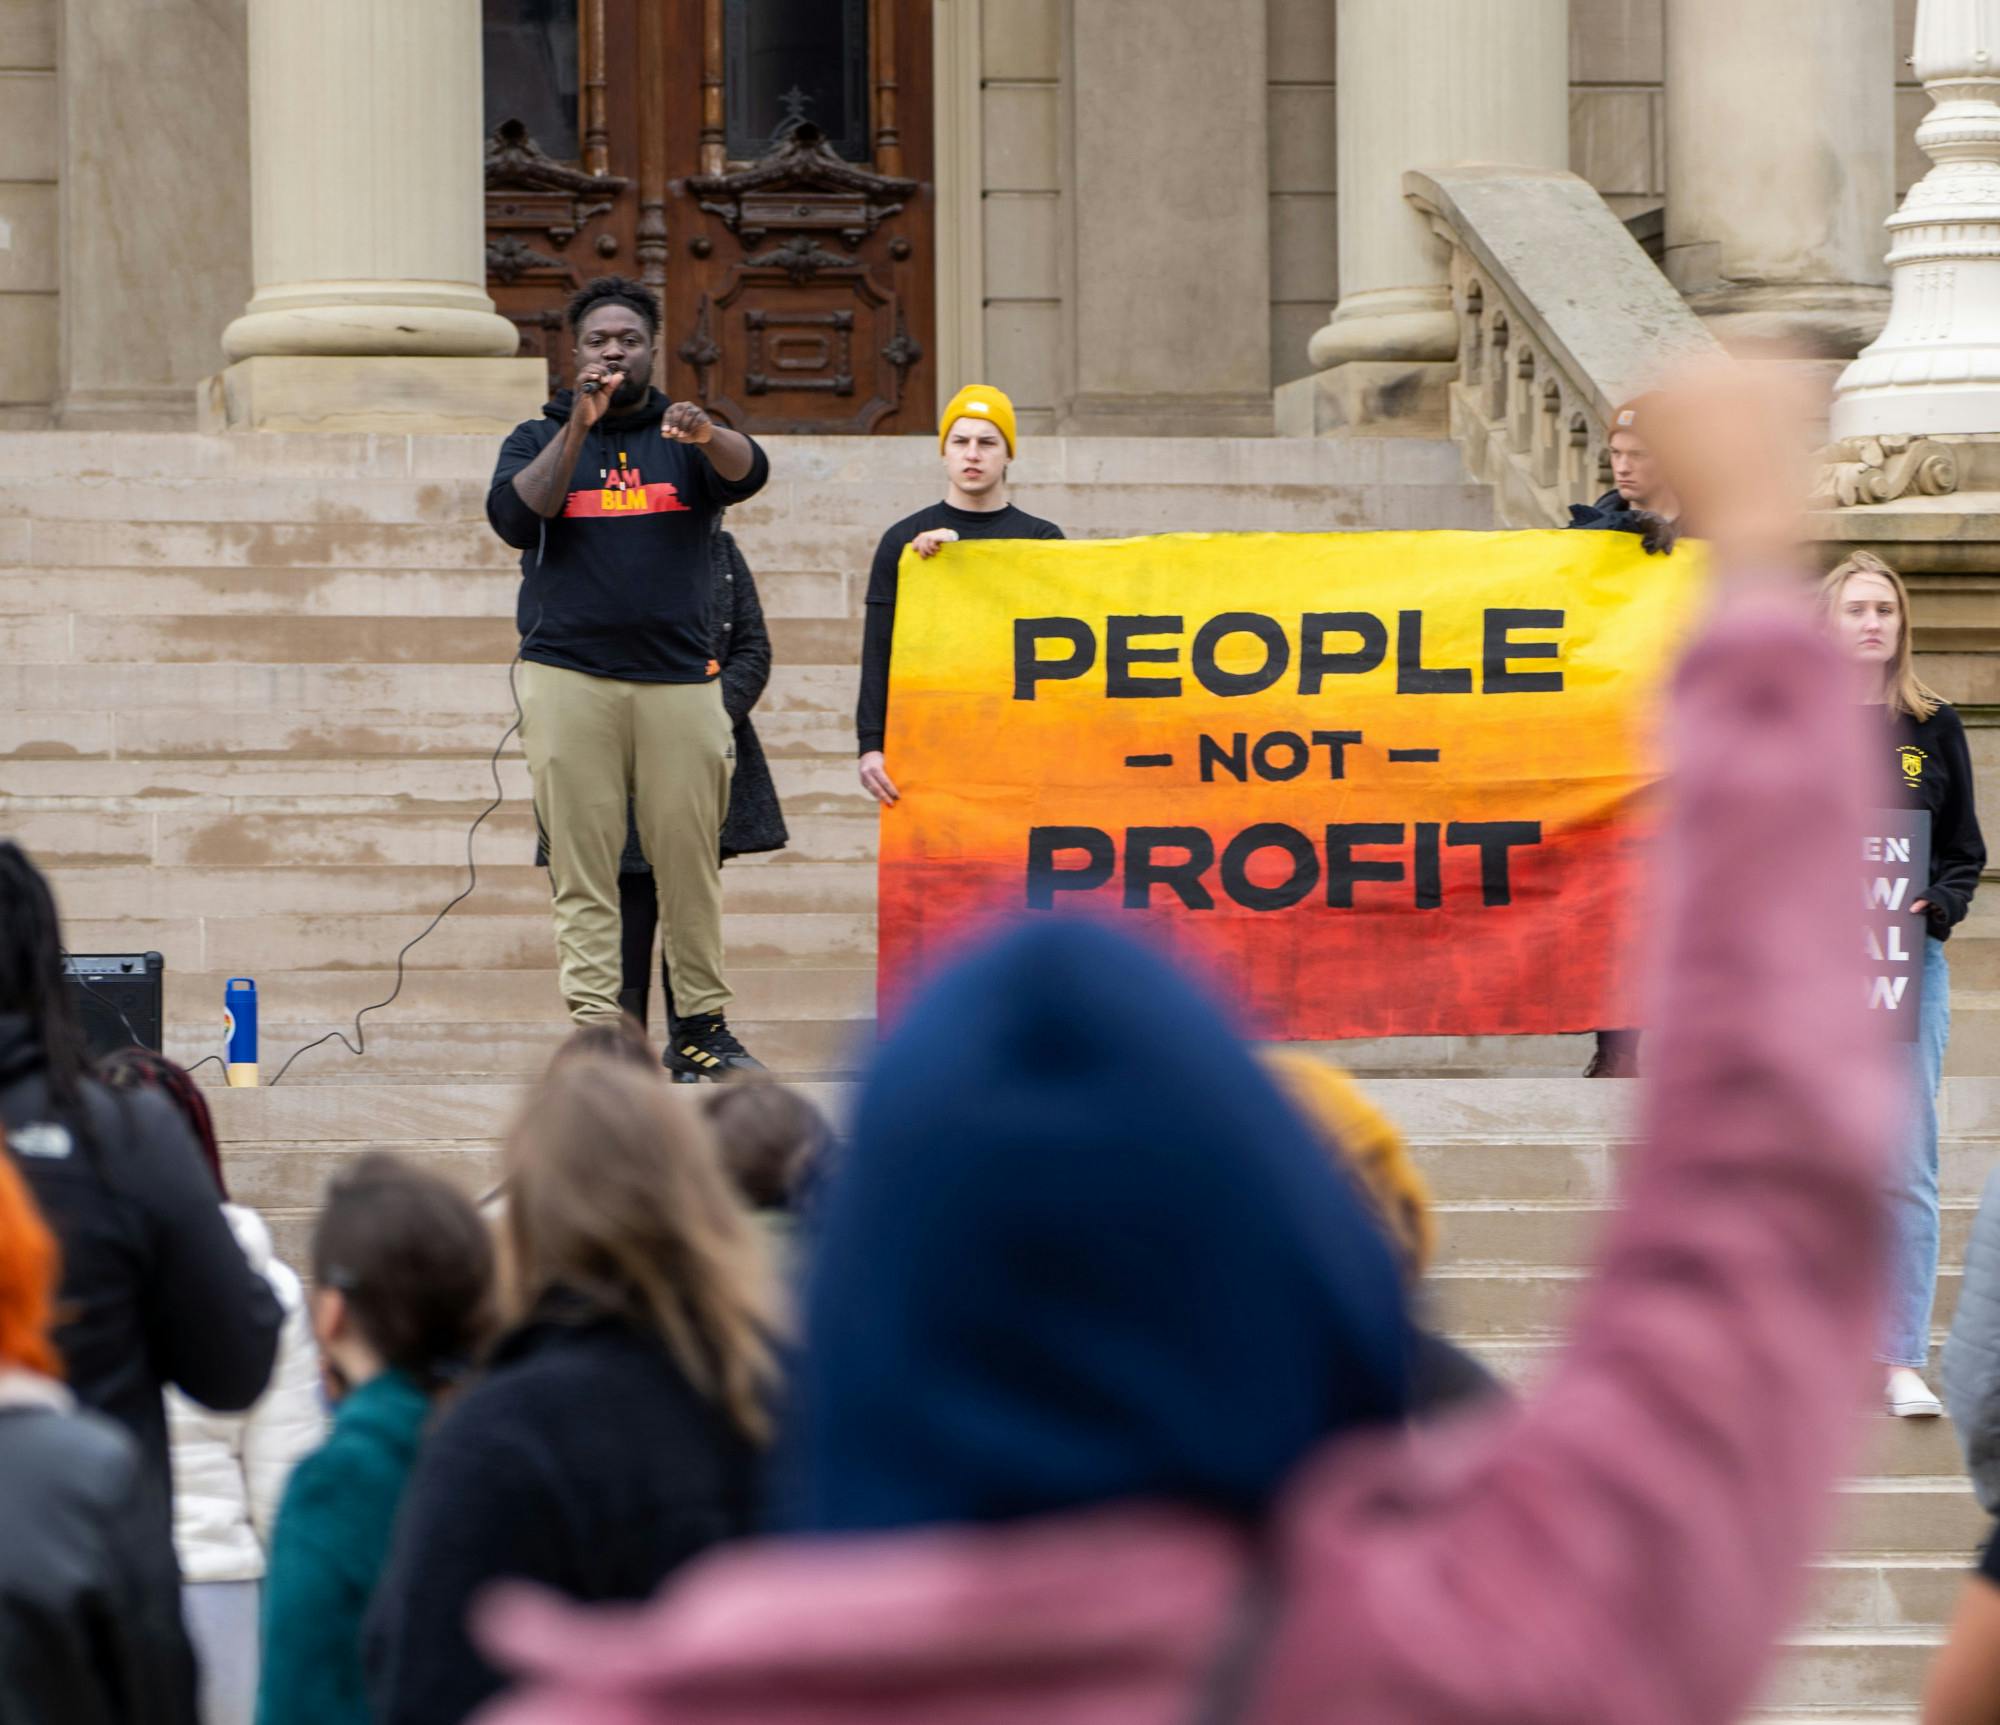 <p>A member of the crowd stands in solidarity with the speaker during the Friday for Futures Event in Lansing on March 25th, 2022.</p>